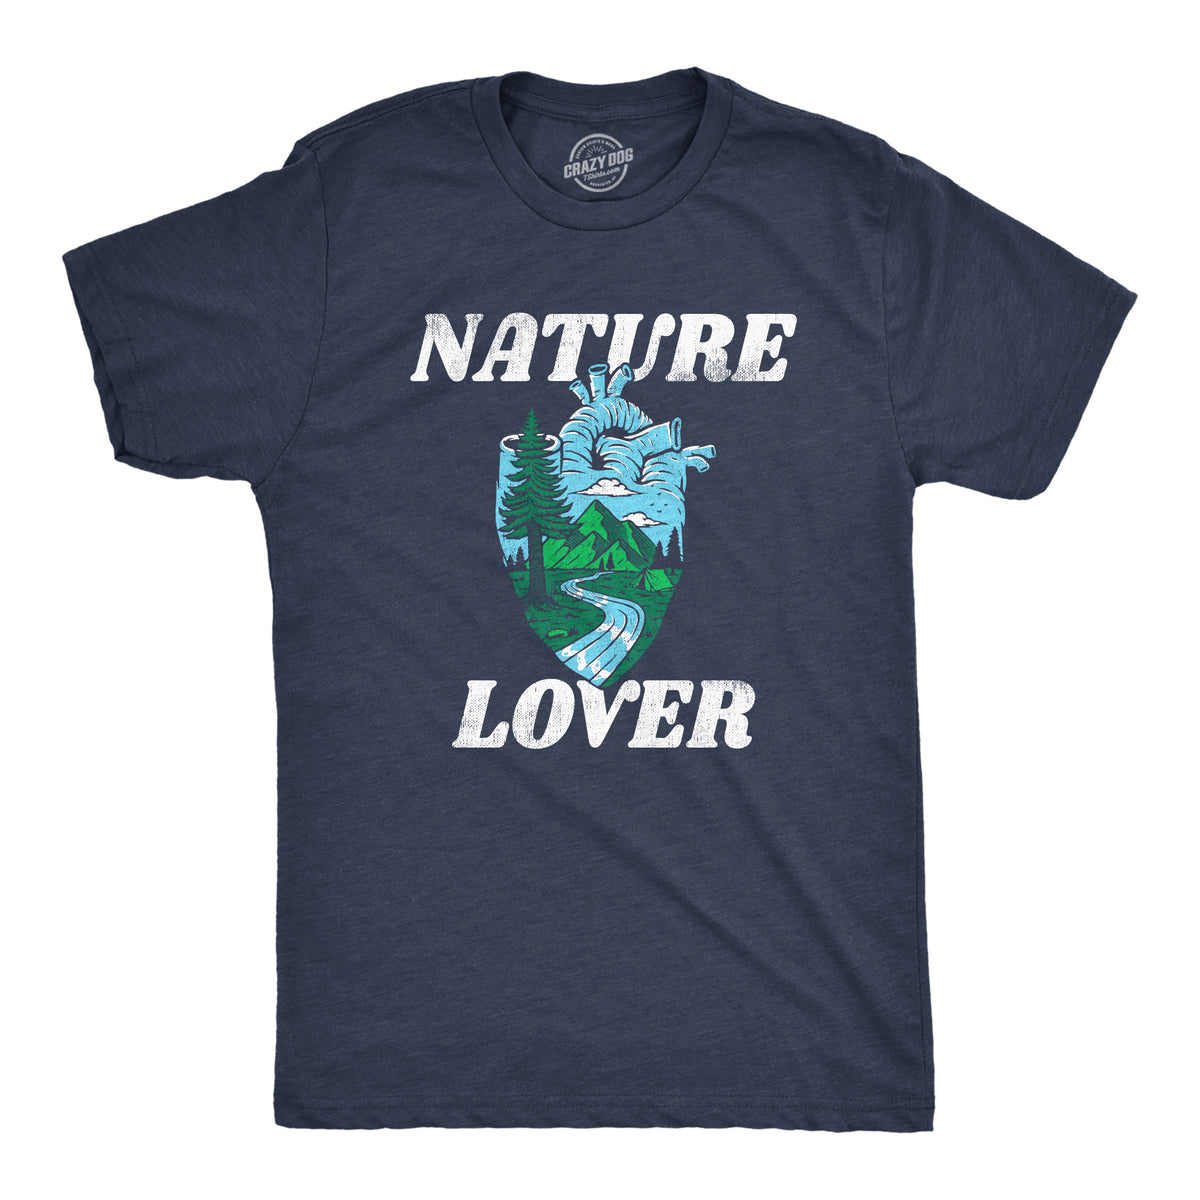 Funny Heather Navy - NATURE Nature Lover Mens T Shirt Nerdy camping Tee